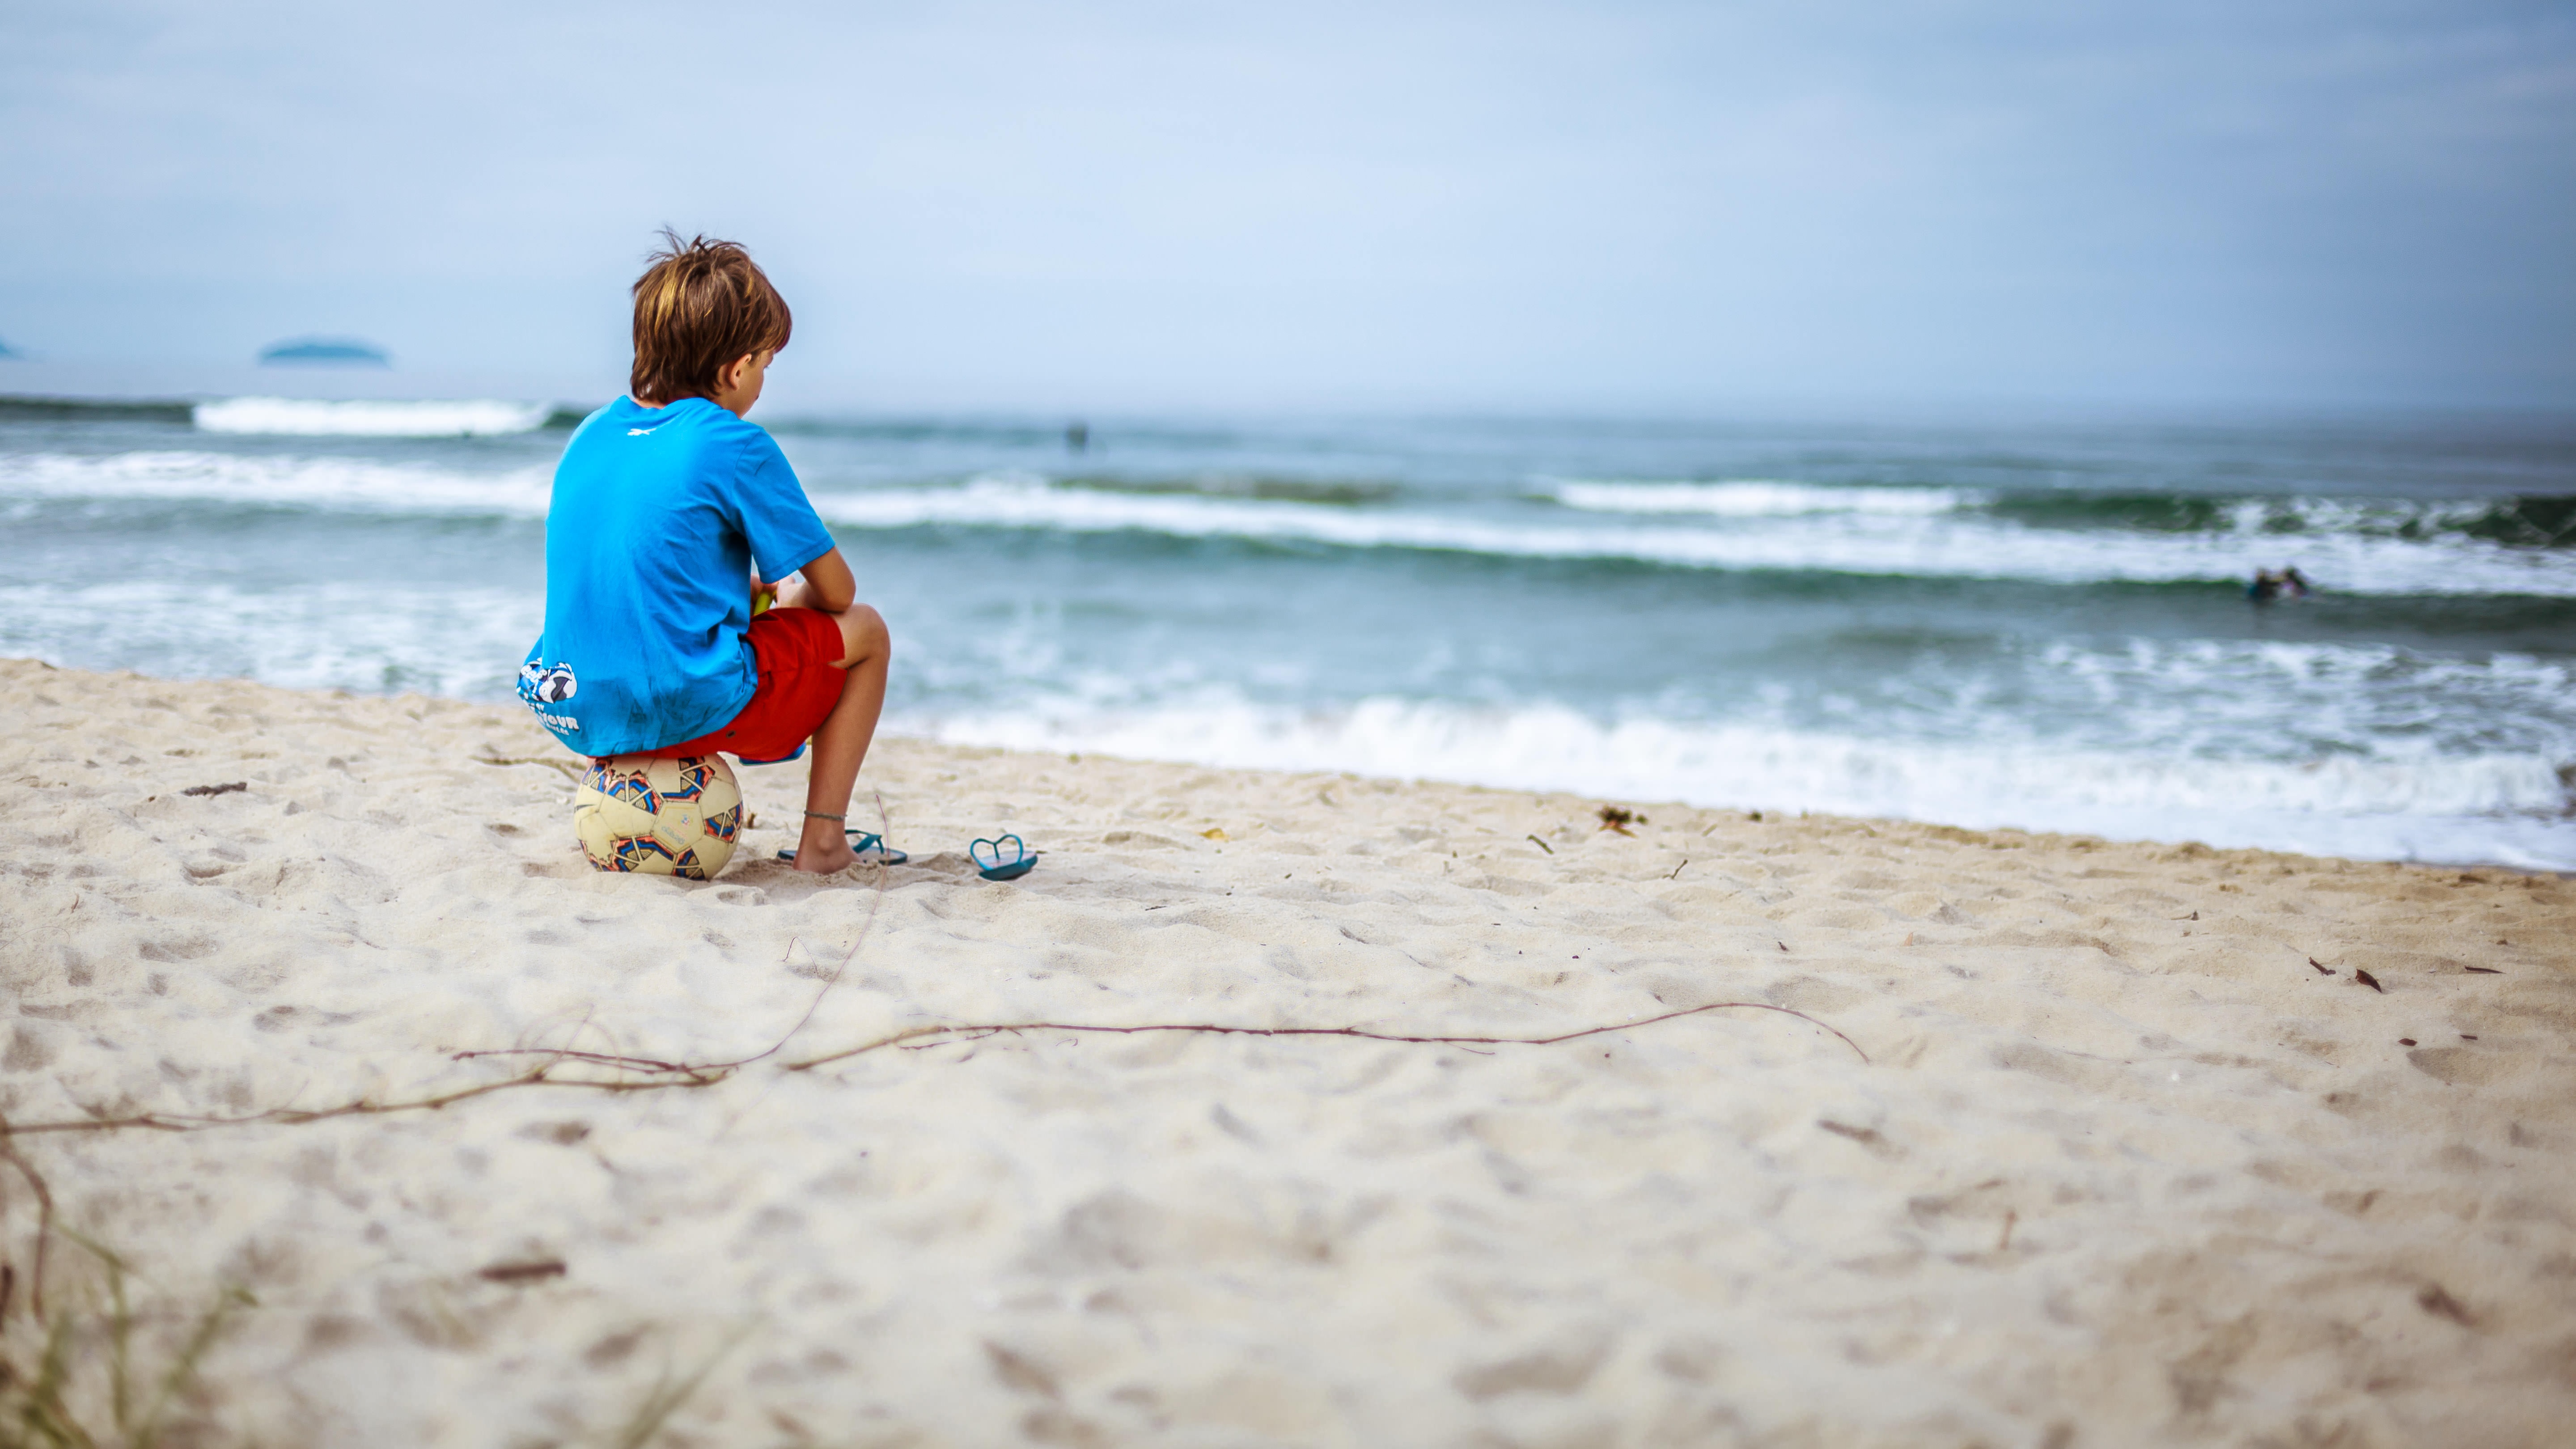 boy sitting on soccer ball by the beach while watching the sea waves during cloudy skies